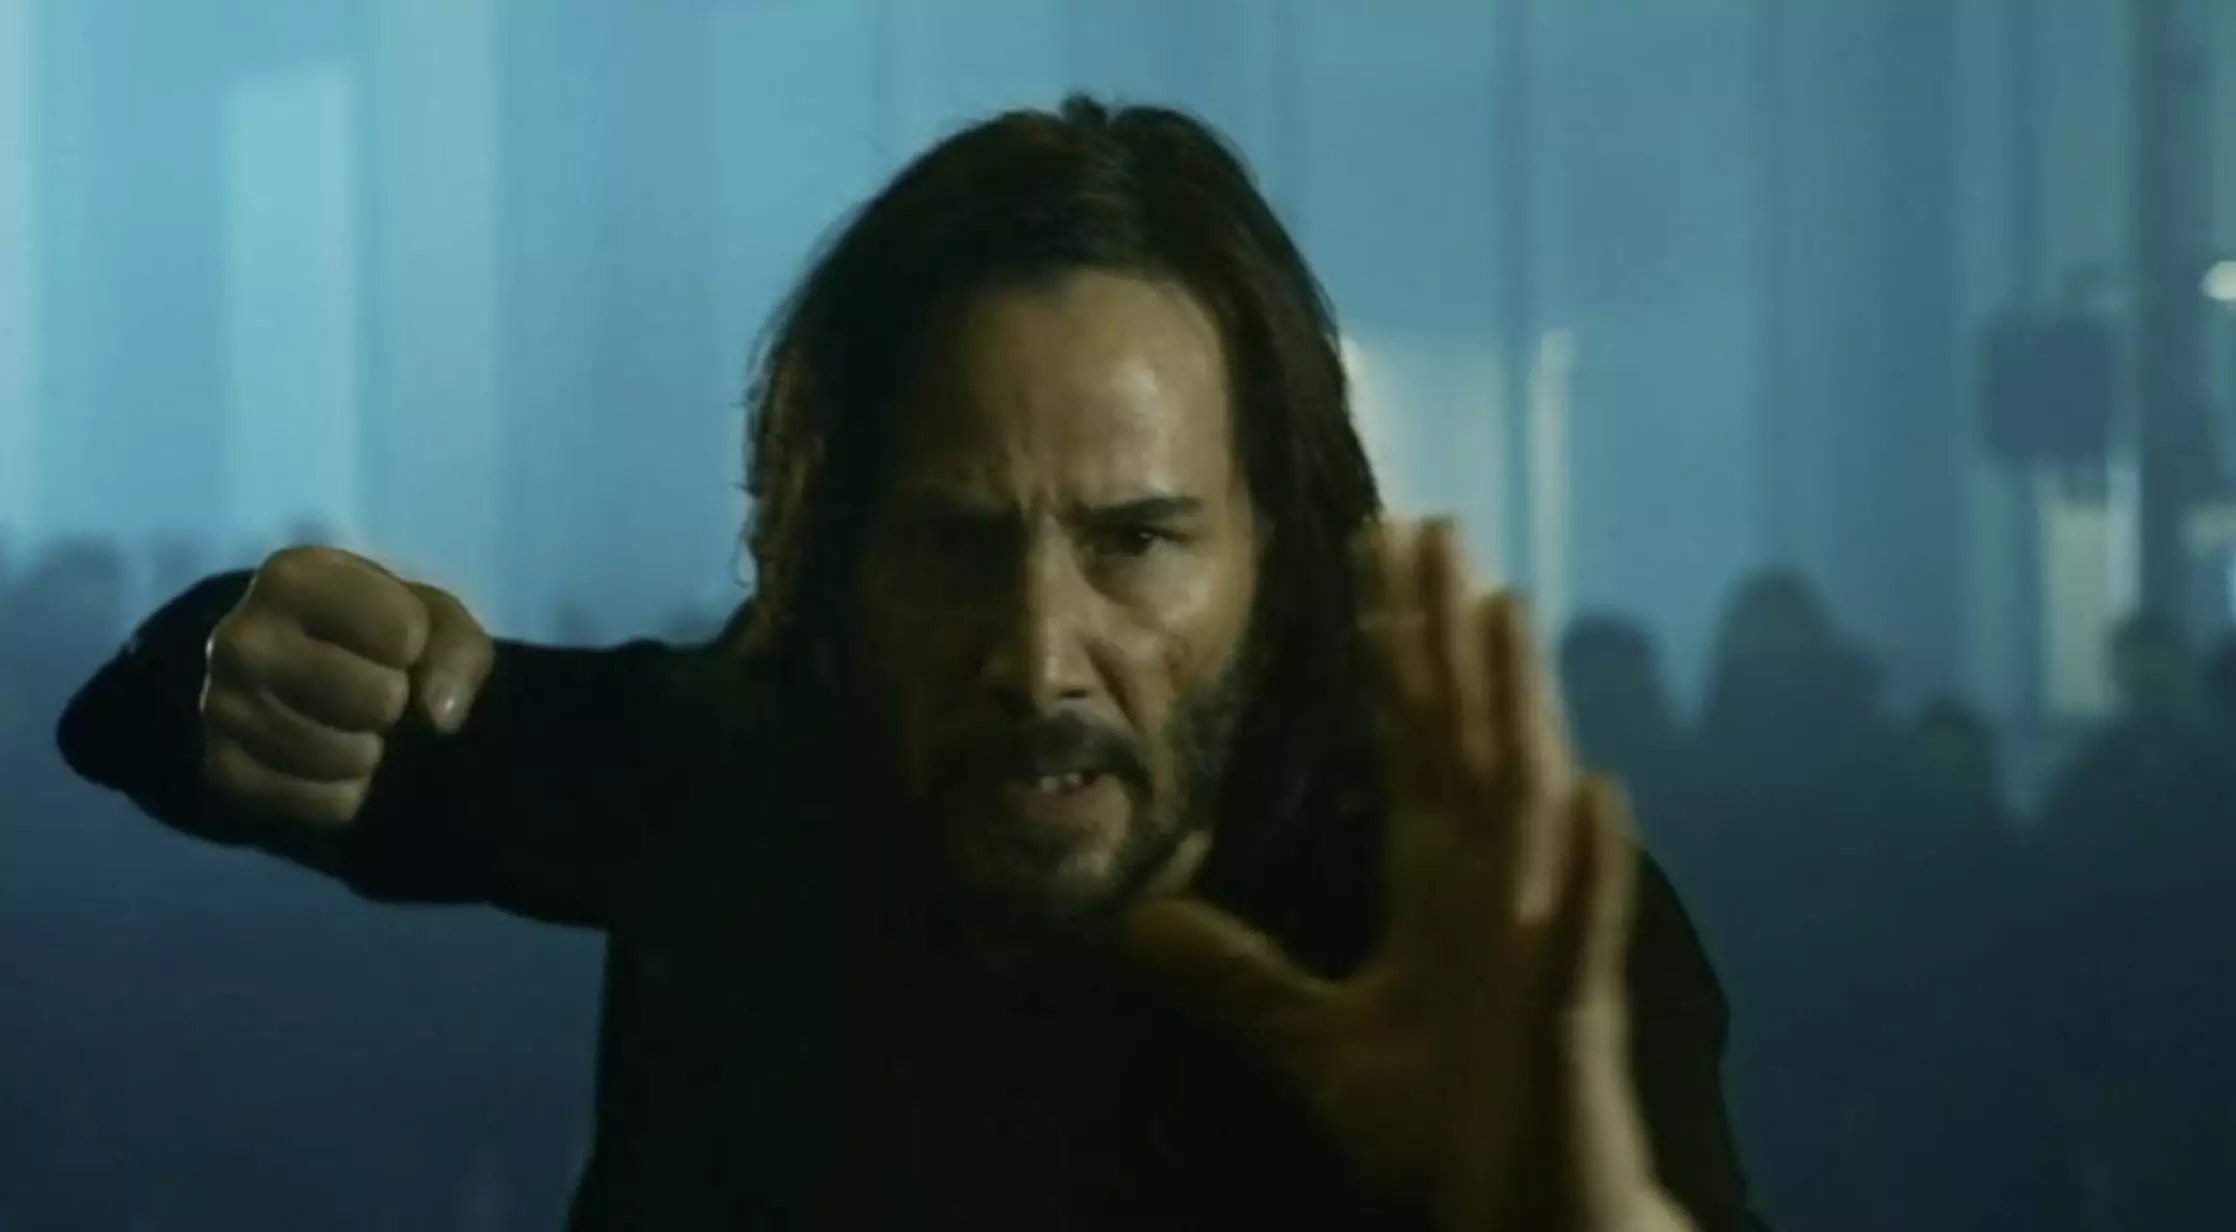 Keanu Reeves reprising his role as Neo.